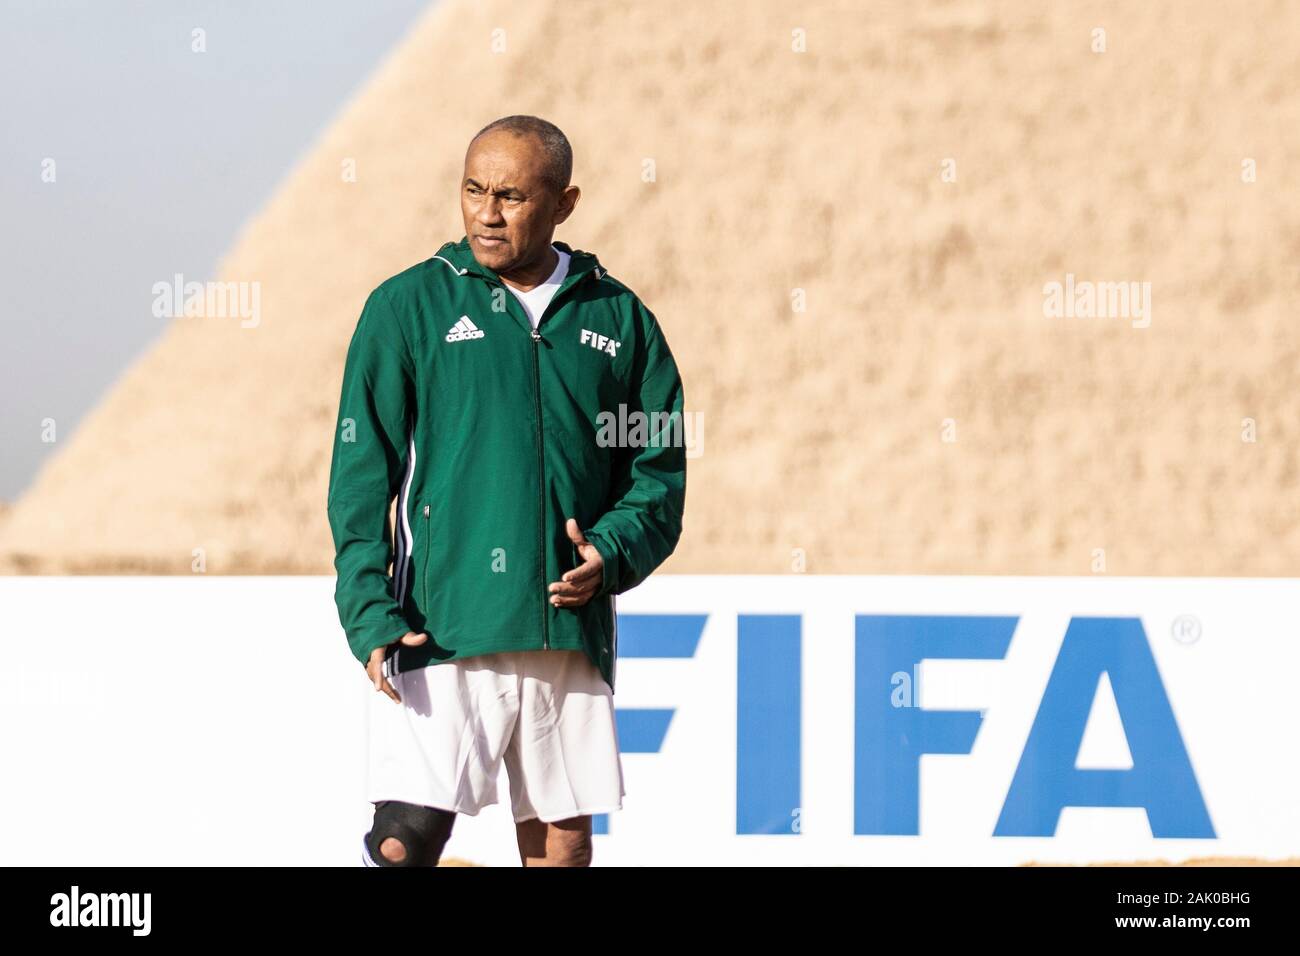 Giza, Egypt. 06th Jan, 2020. CAF President Ahmad Ahmad is pictured during the CAF and FIFA Legends soccer match at the Giza Pyramids complex, ahead of the CAF awards 2019. The CAF awards 2019 Gala is scheduled to be held in Hurghada on 07 January 2020. Credit: Omar Zoheiry/dpa/Alamy Live News Stock Photo